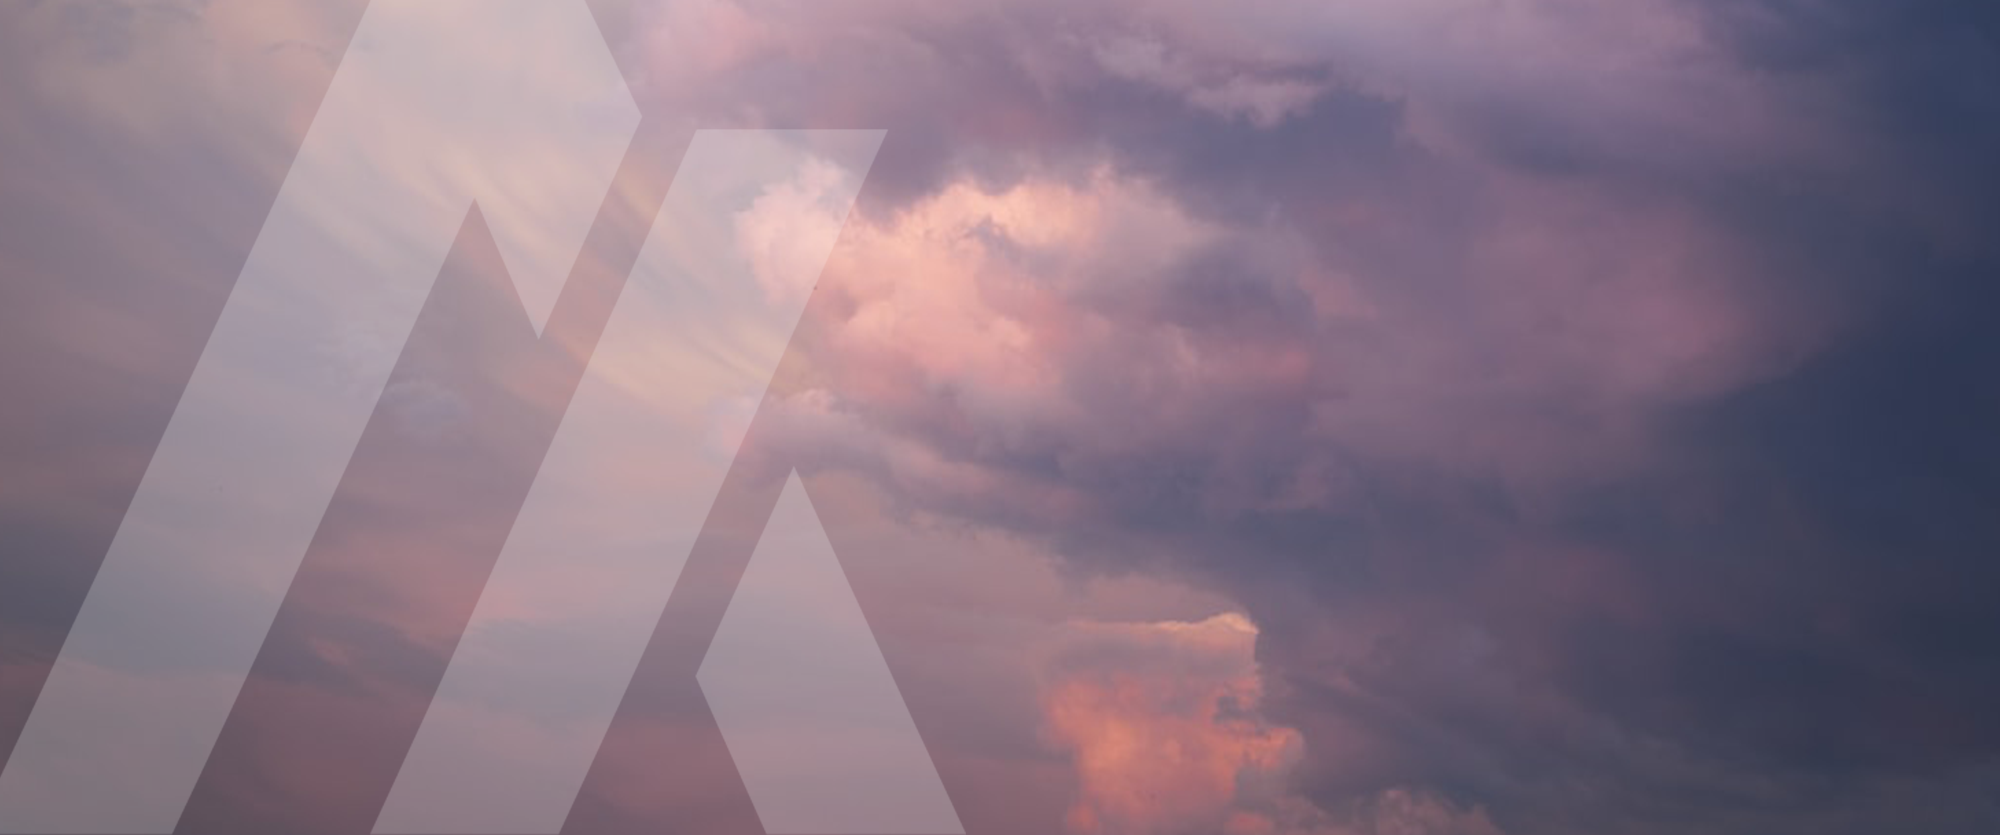 background showing clouds with purple sunset and ommax signet